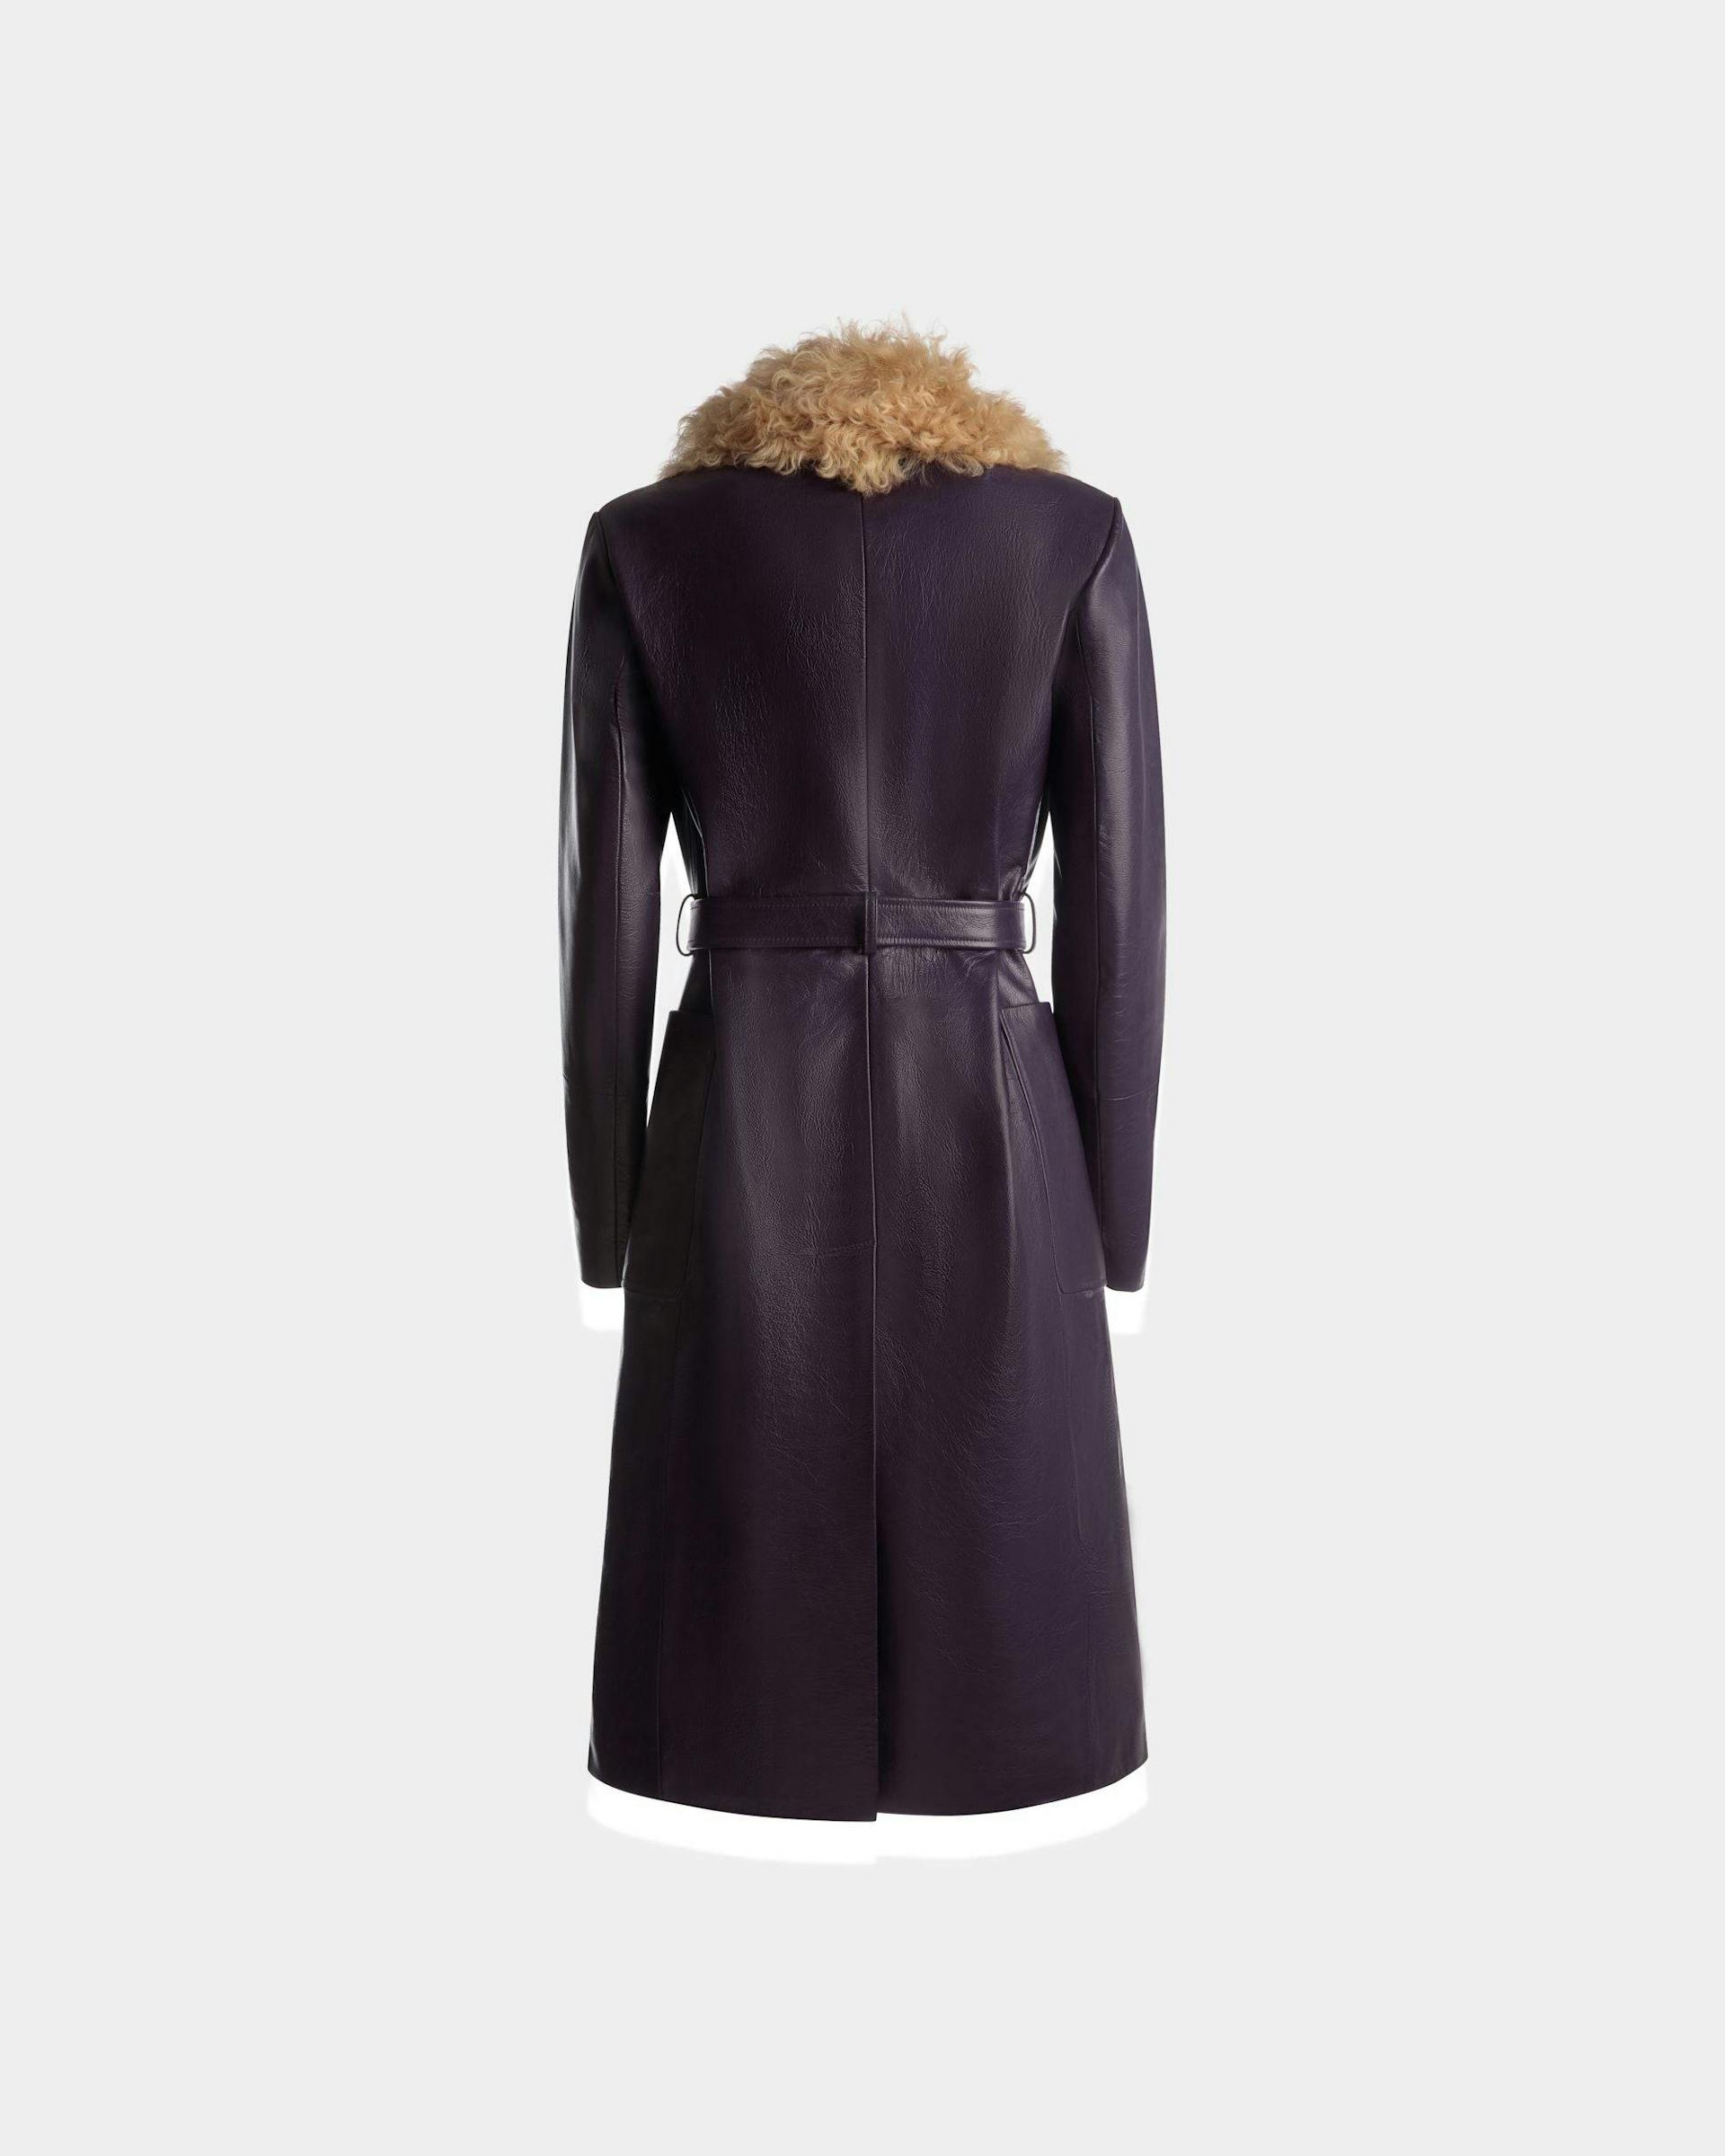 Women's Fur Collar Coat In Orchid Leather | Bally | Still Life Back